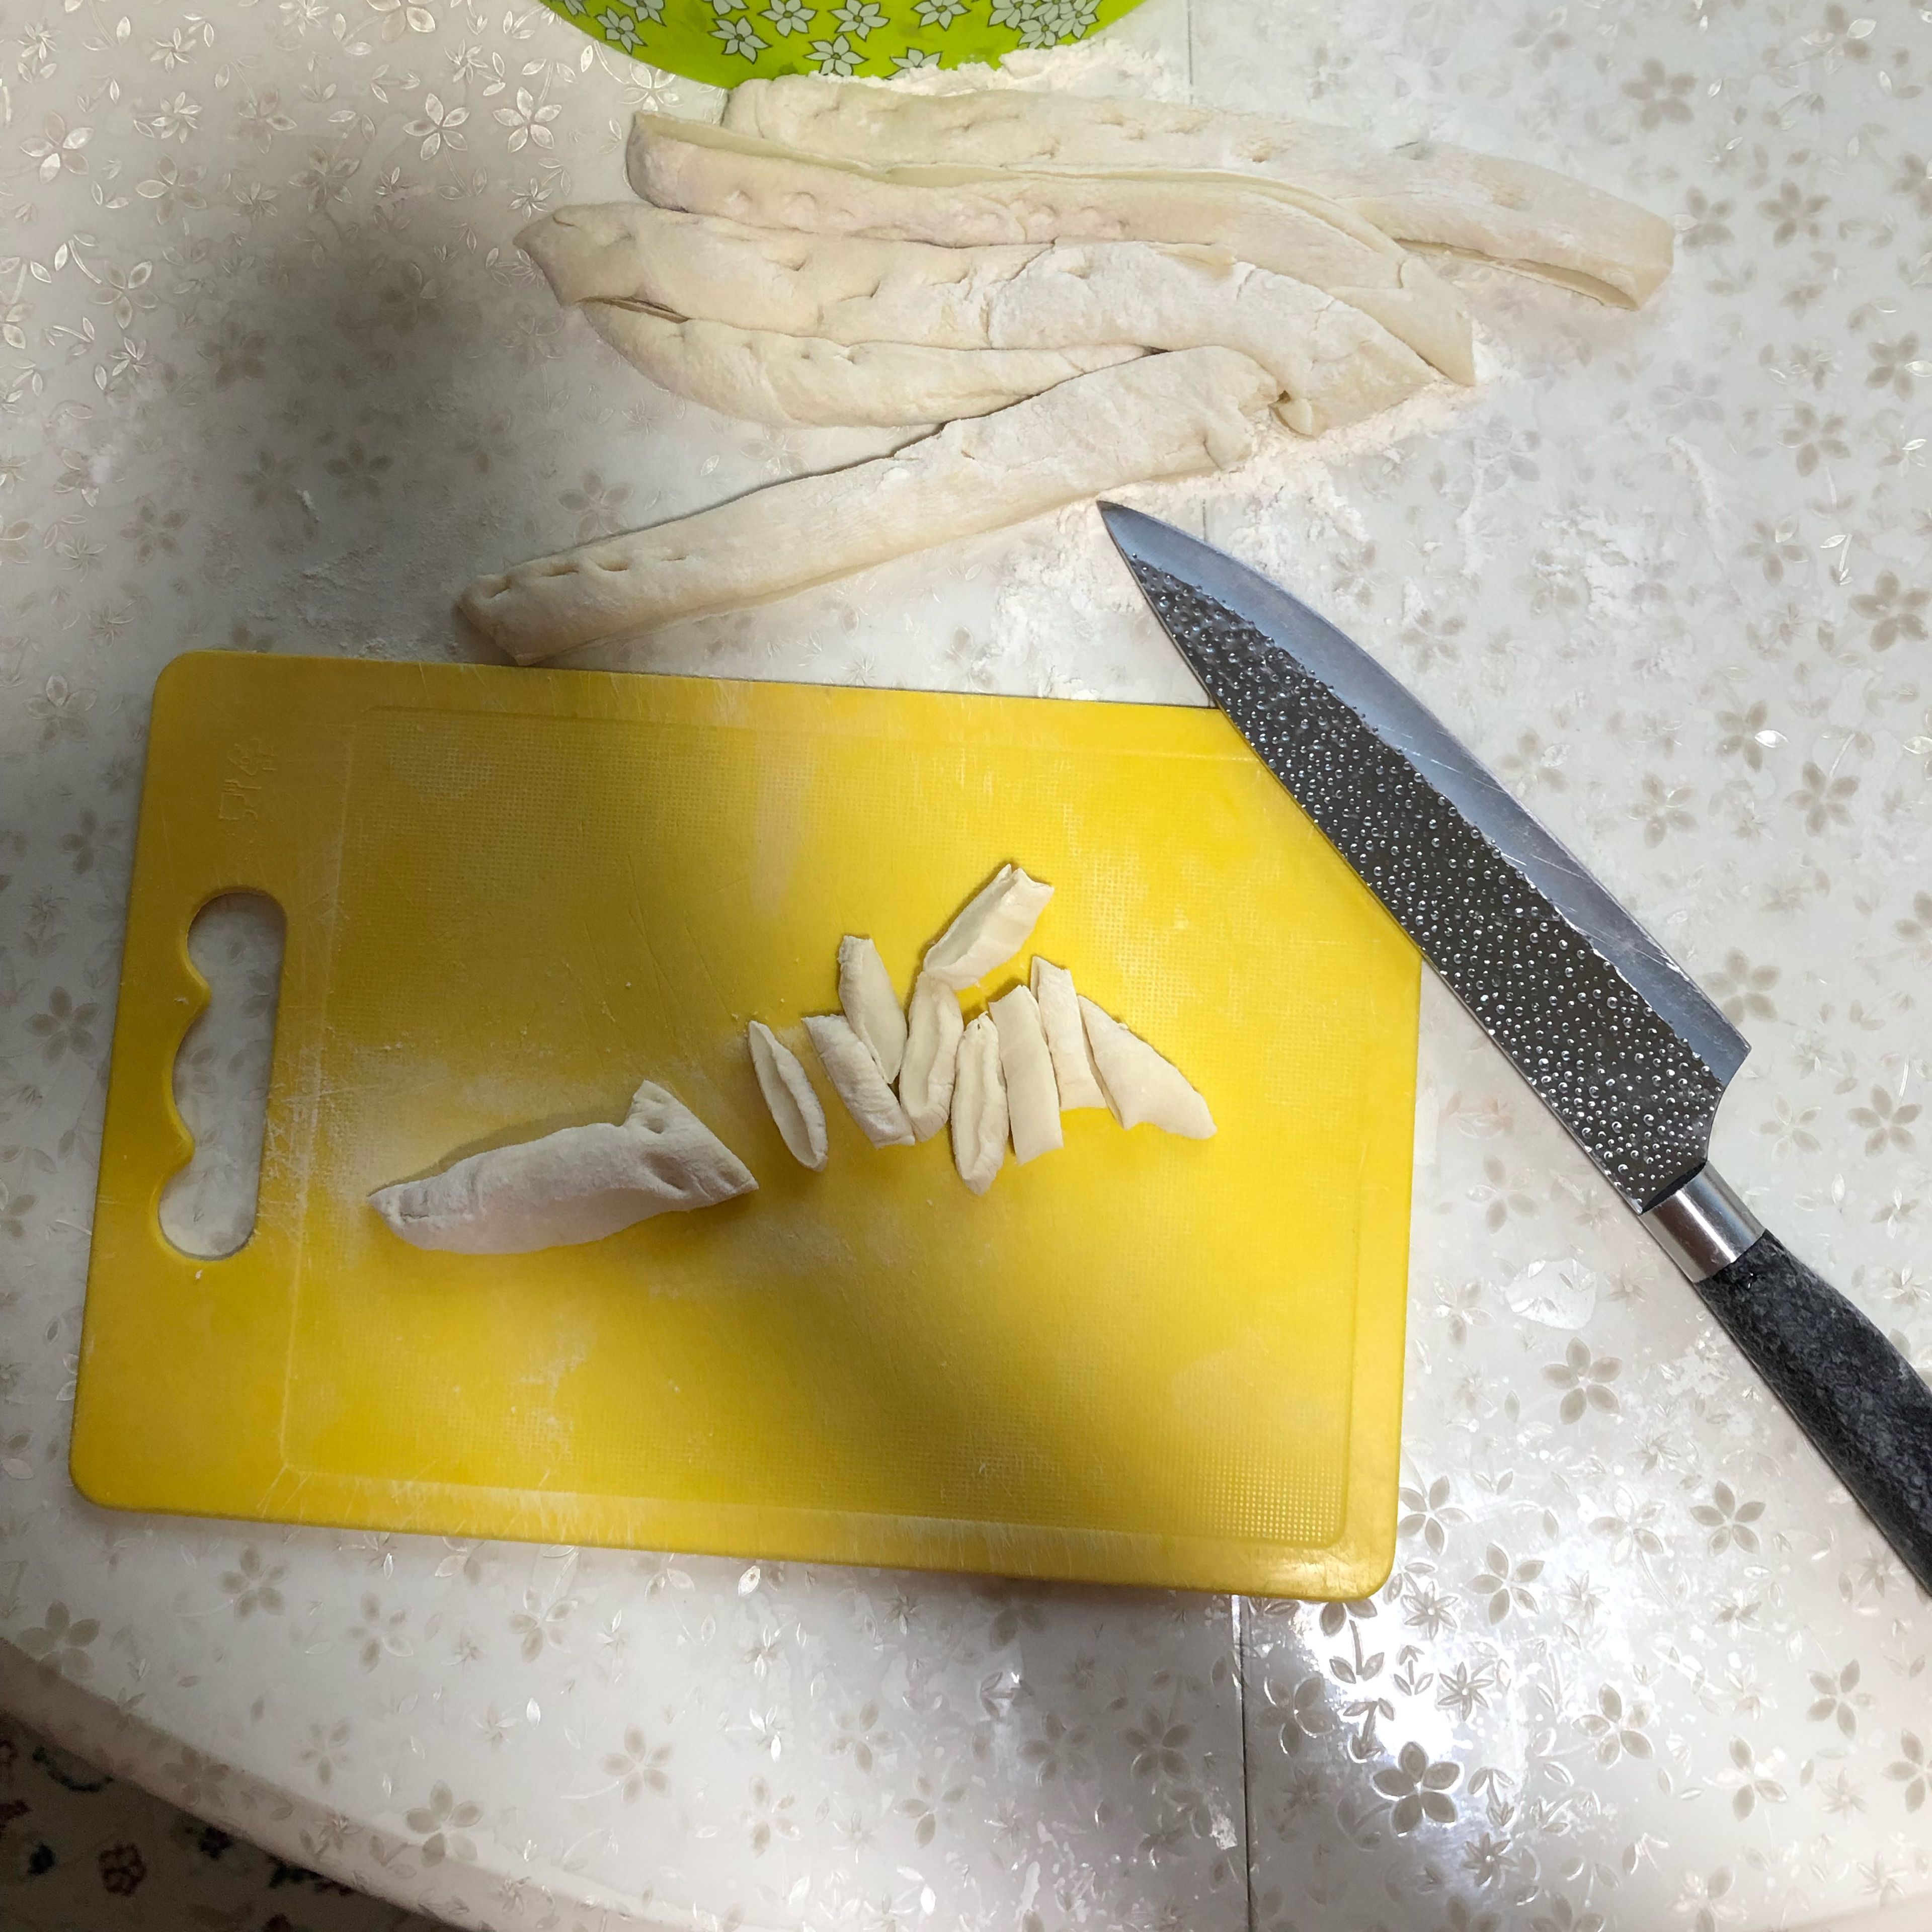 Get back to our dough and cut it into 3 equal parts. Roll out each parts with a rolling pin, to approx. 1 cm thick. Then cut them into 2 cm wide stripes. Cut each stripe crosswise into small pieces, these small dough pieces will be future galnash.